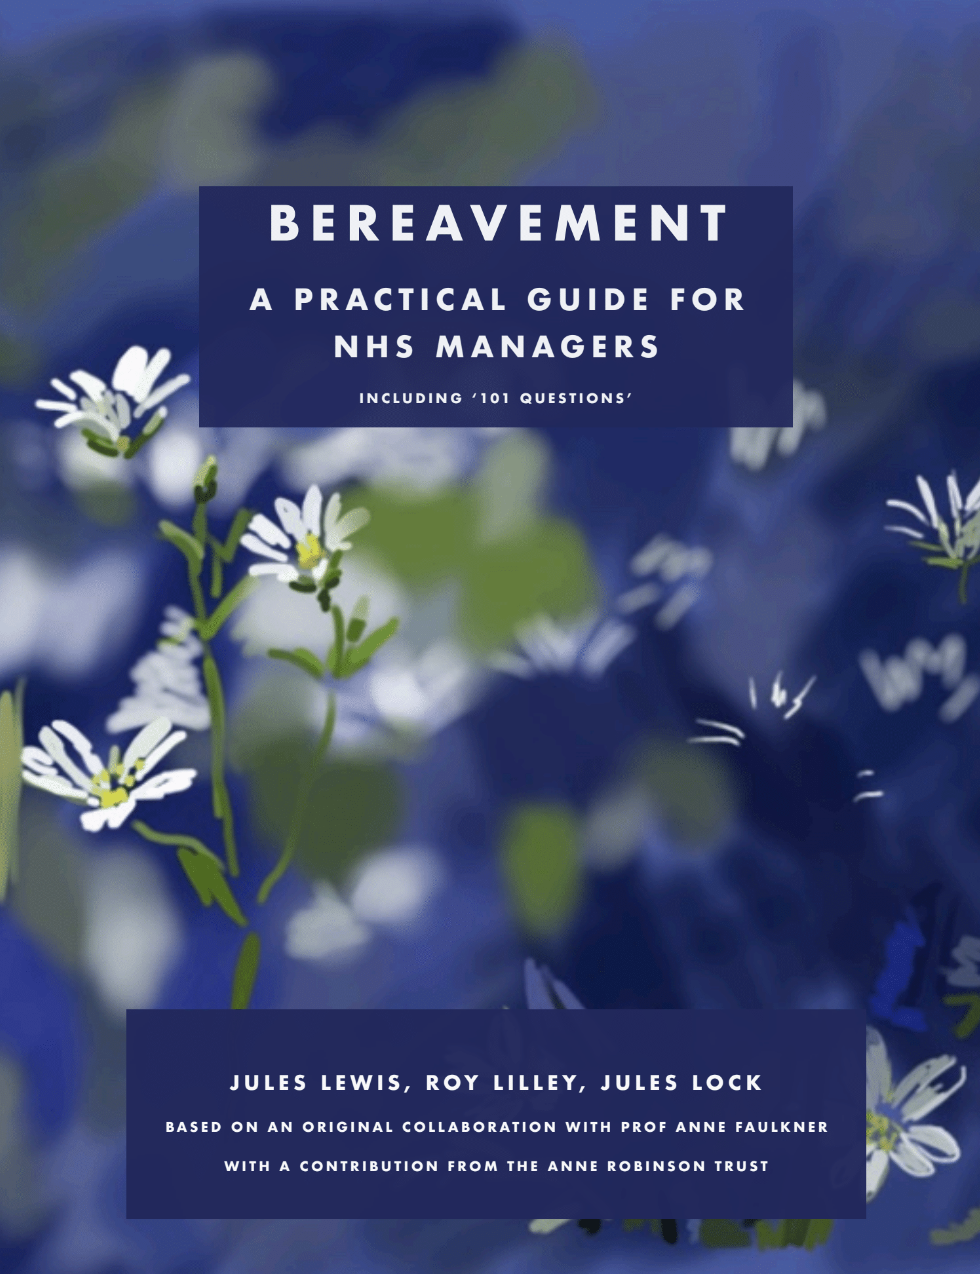 Bereavement- a practical guide for NHS Managers featured image